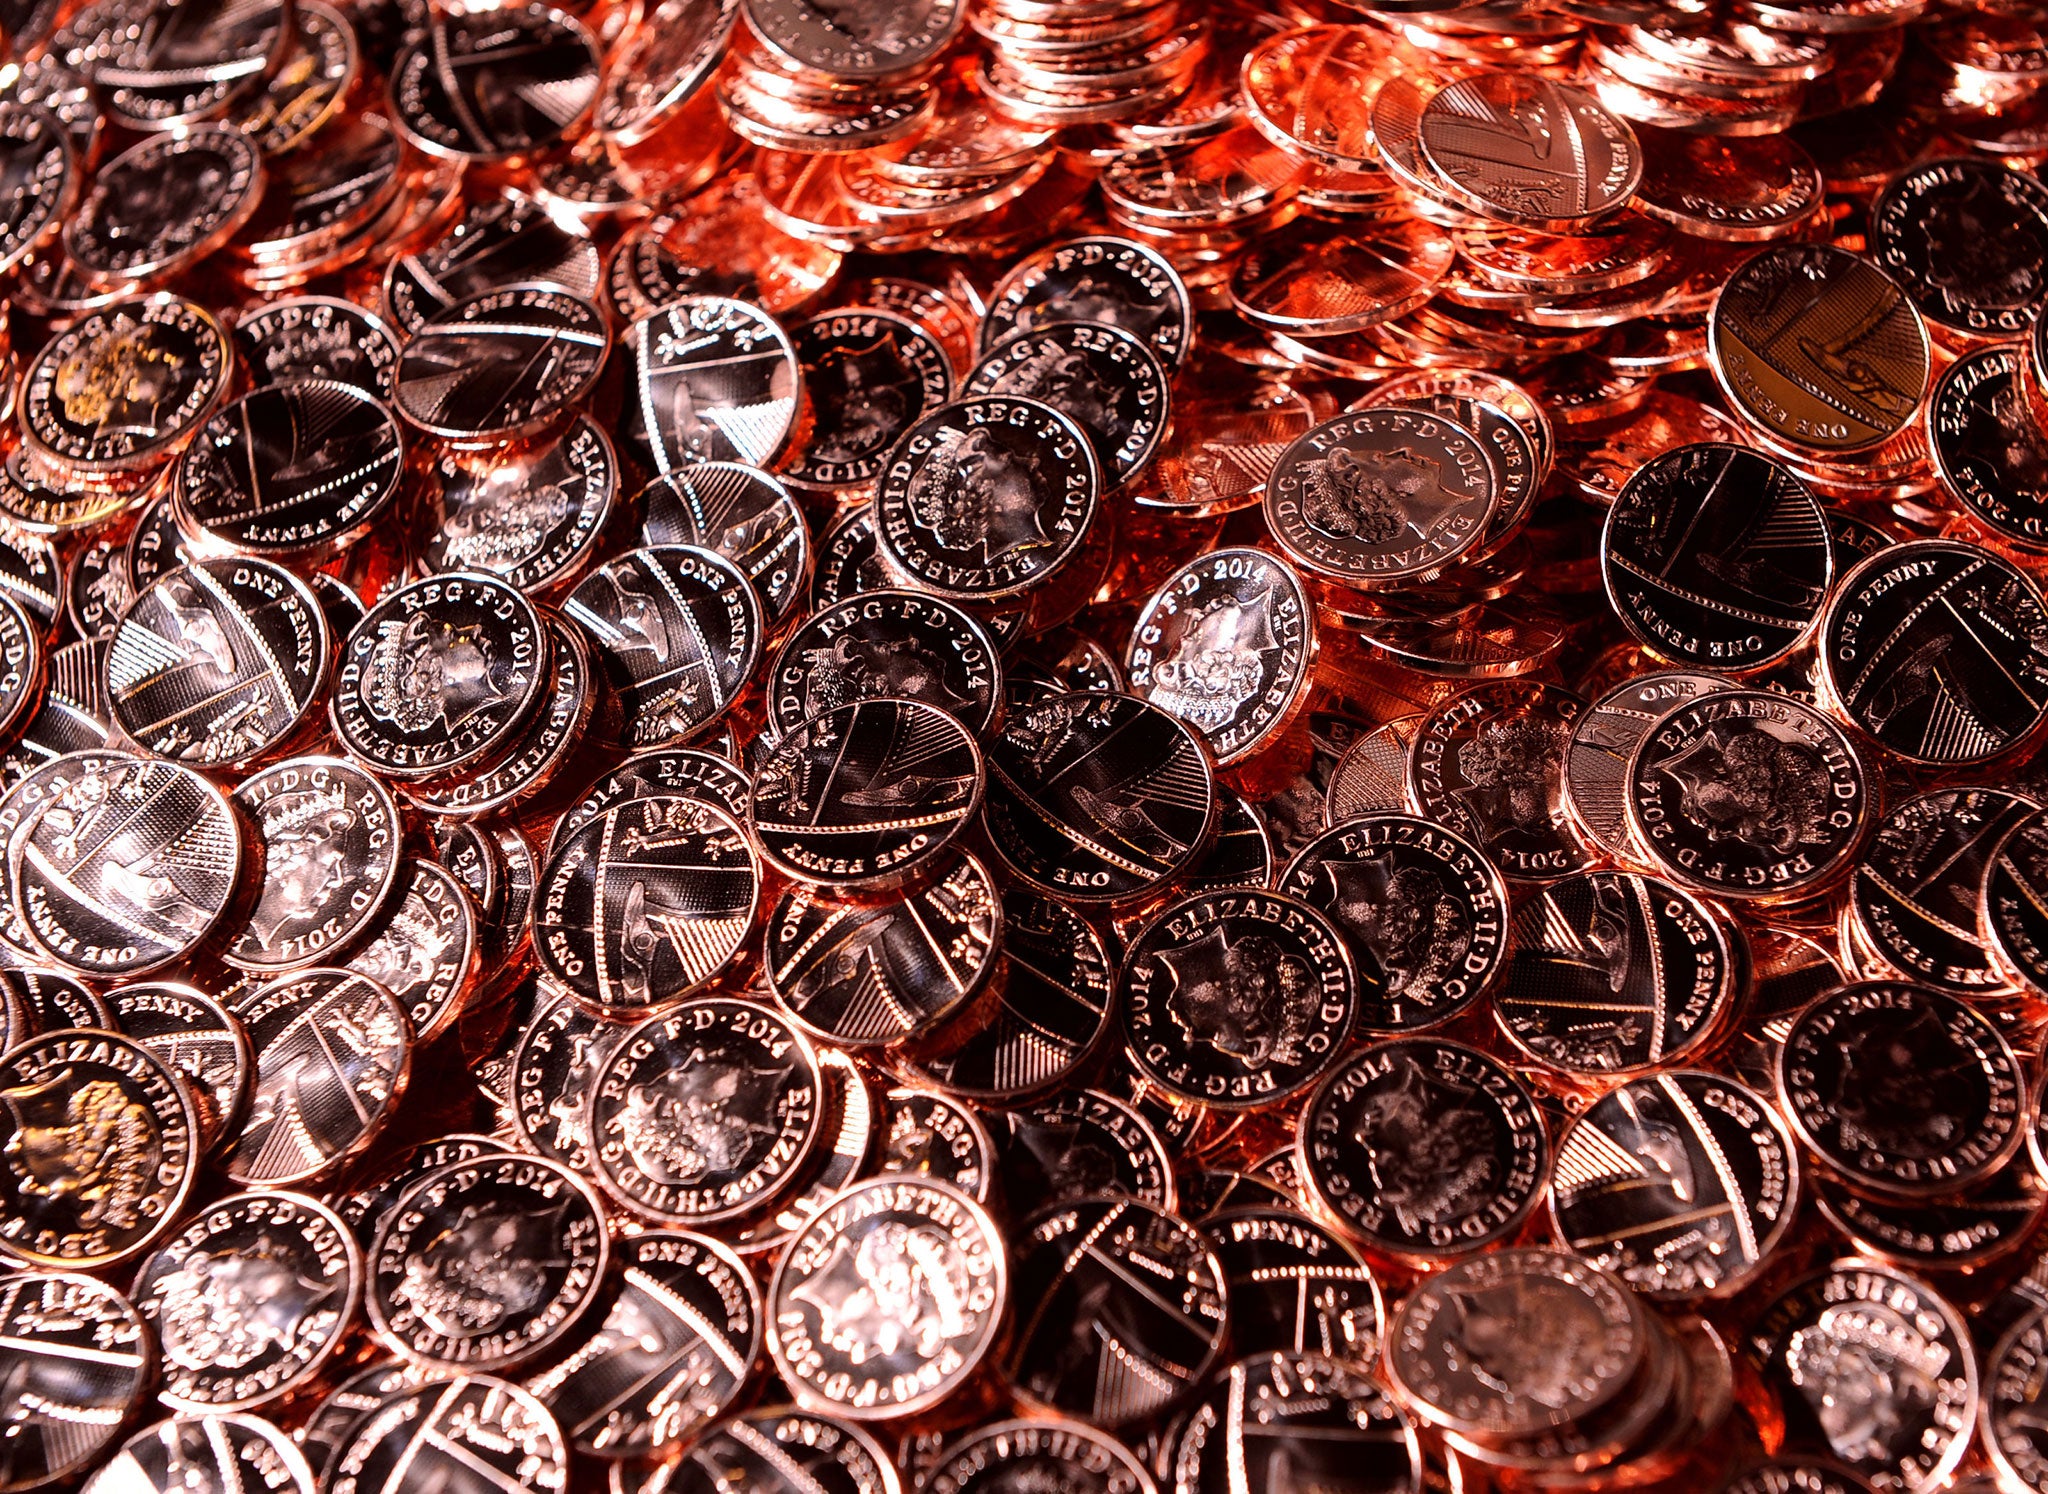 Six out of every ten 1p and 2p coins are used just once before they drop out of circulation